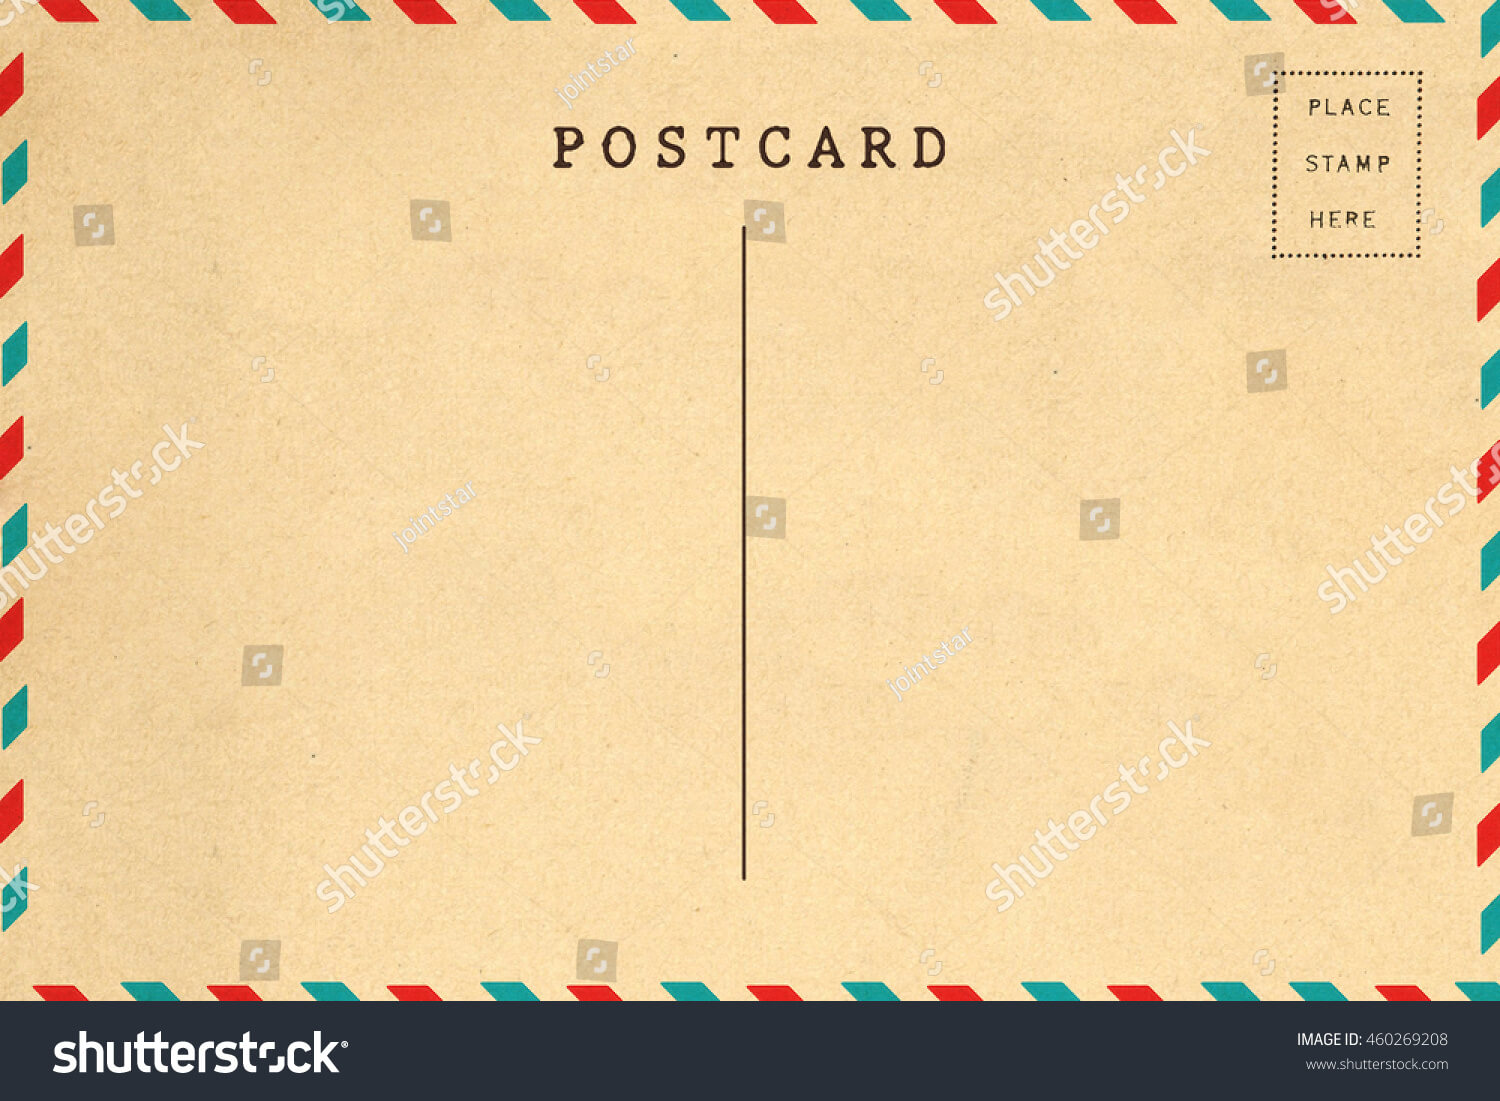 Back Airmail Blank Postcard Template Stock Photo (Edit Now Regarding Airmail Postcard Template